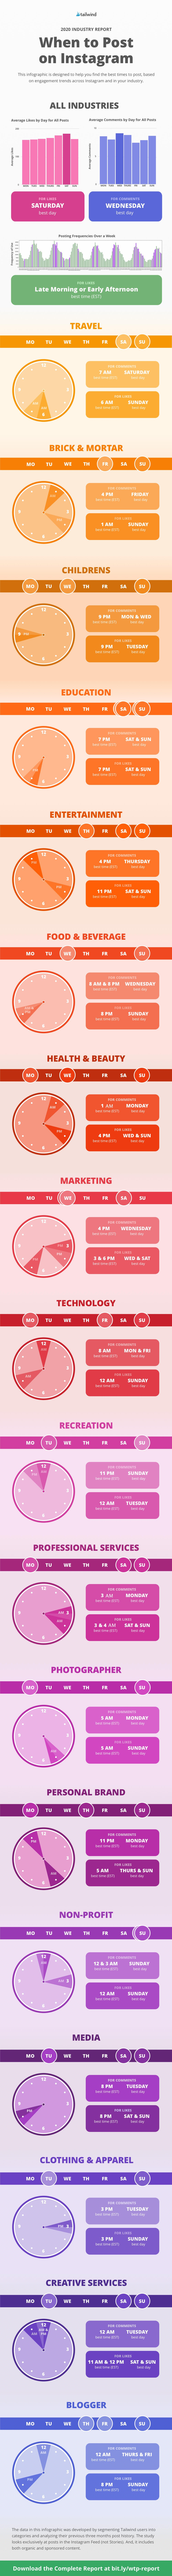 Infographic detailing the best times to post on Instagram.